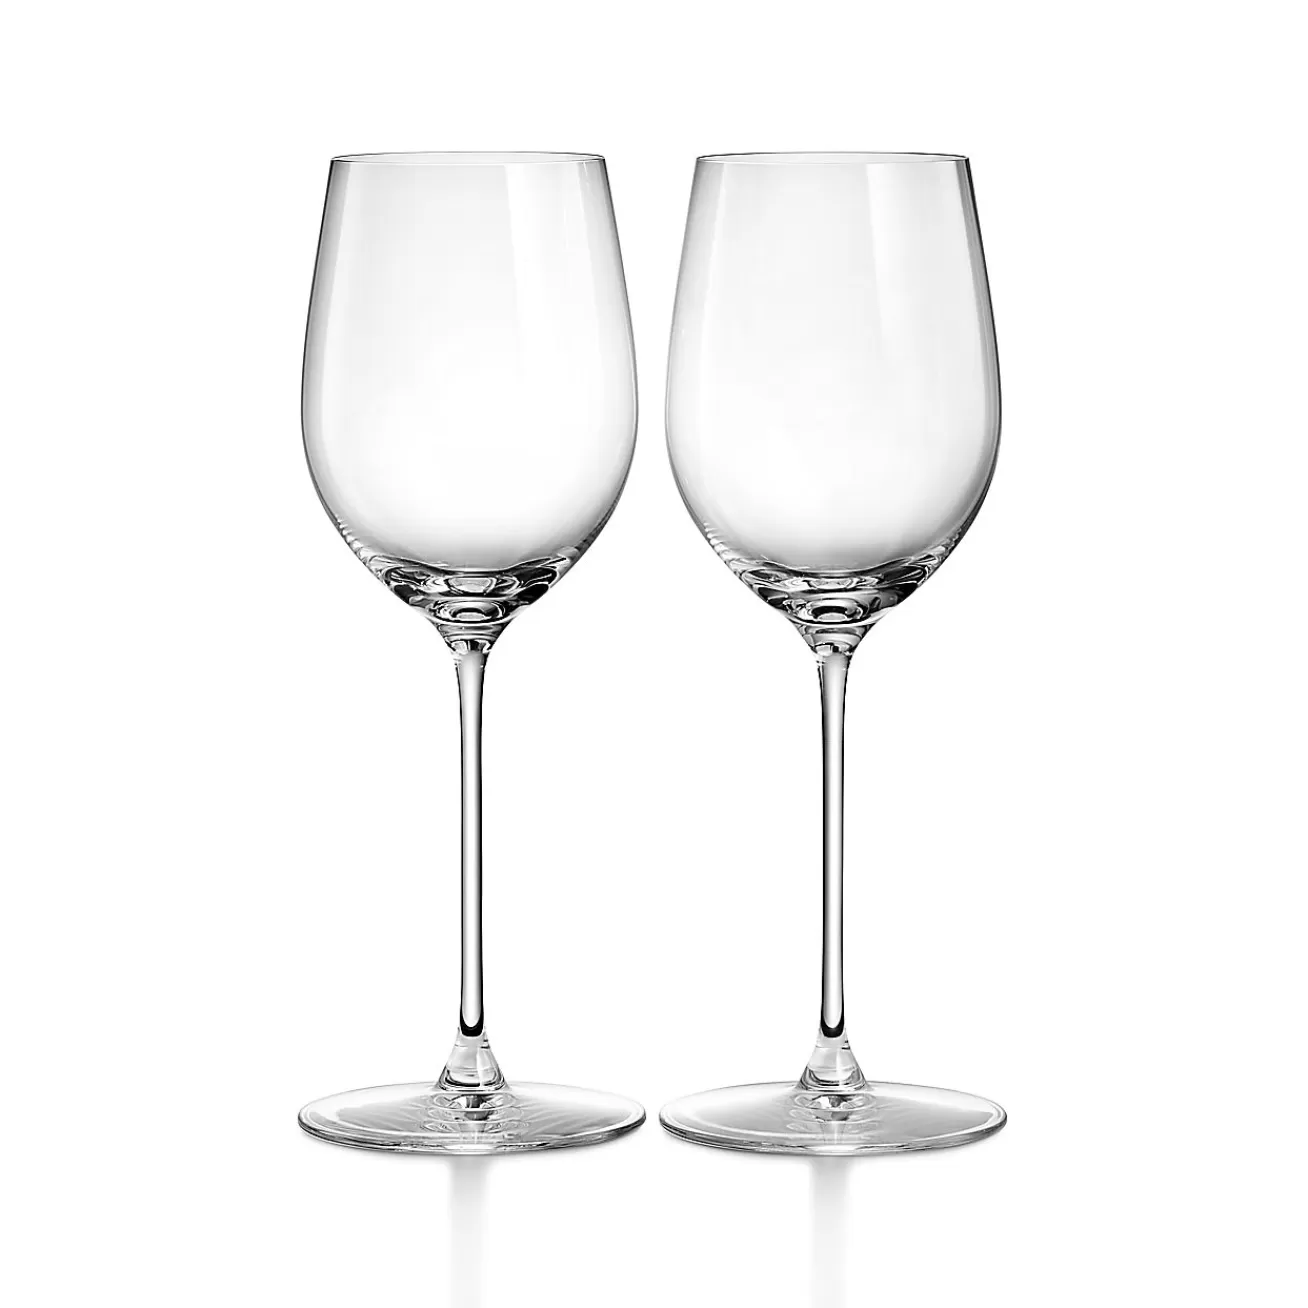 Tiffany & Co. Tiffany Home Essentials White Wine Glasses in Crystal Glass, Set of Two | ^ The Home | Housewarming Gifts